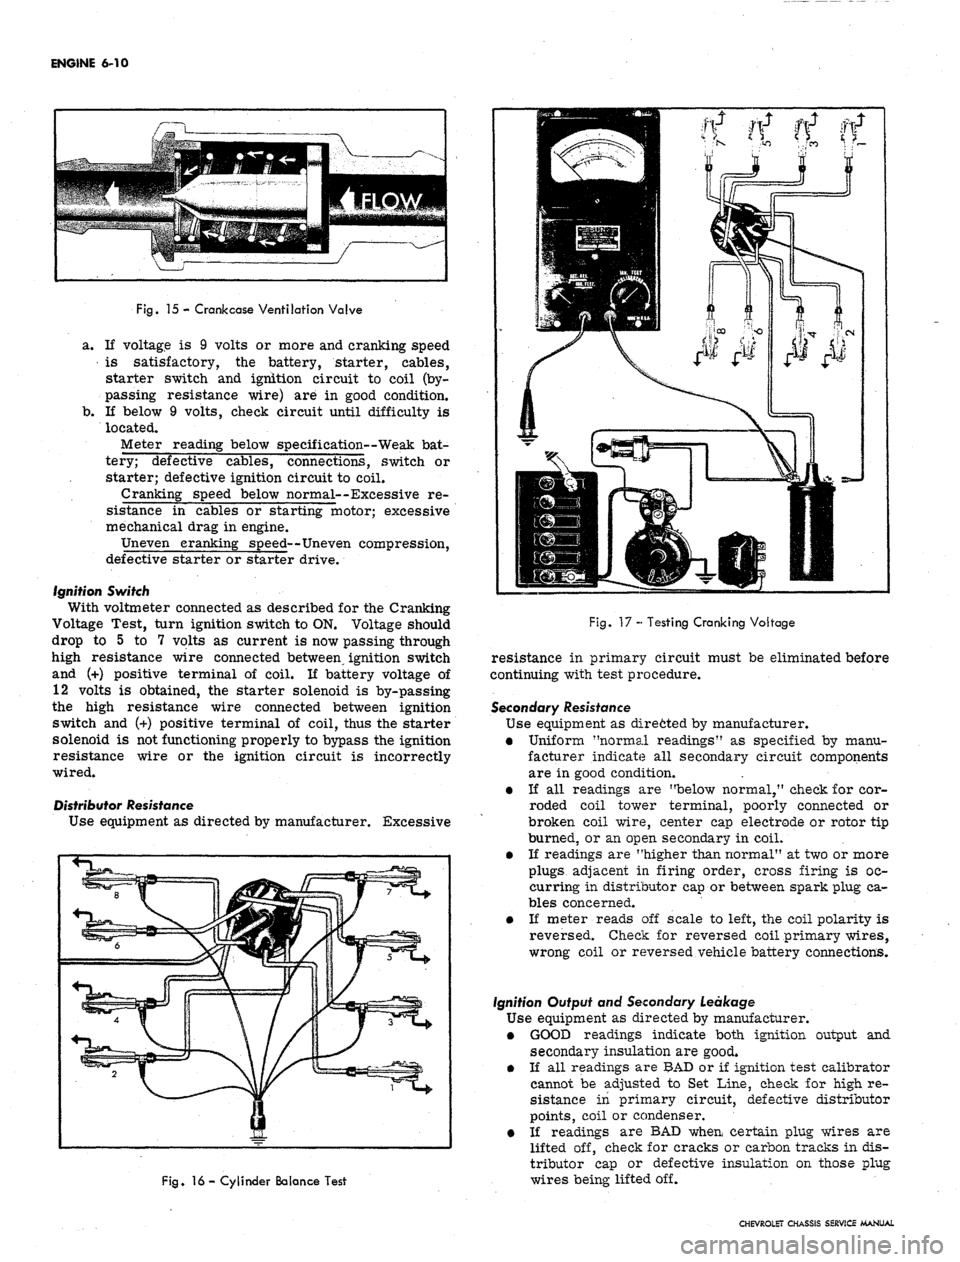 CHEVROLET CAMARO 1967 1.G Chassis Manual PDF 
ENGINE 6-10

Fig.
 15 - Crank case Ventilation Valve

a. If voltage is 9 volts or more and cranking speed

is satisfactory, the battery, starter, cables,

starter switch and ignition circuit to coil 